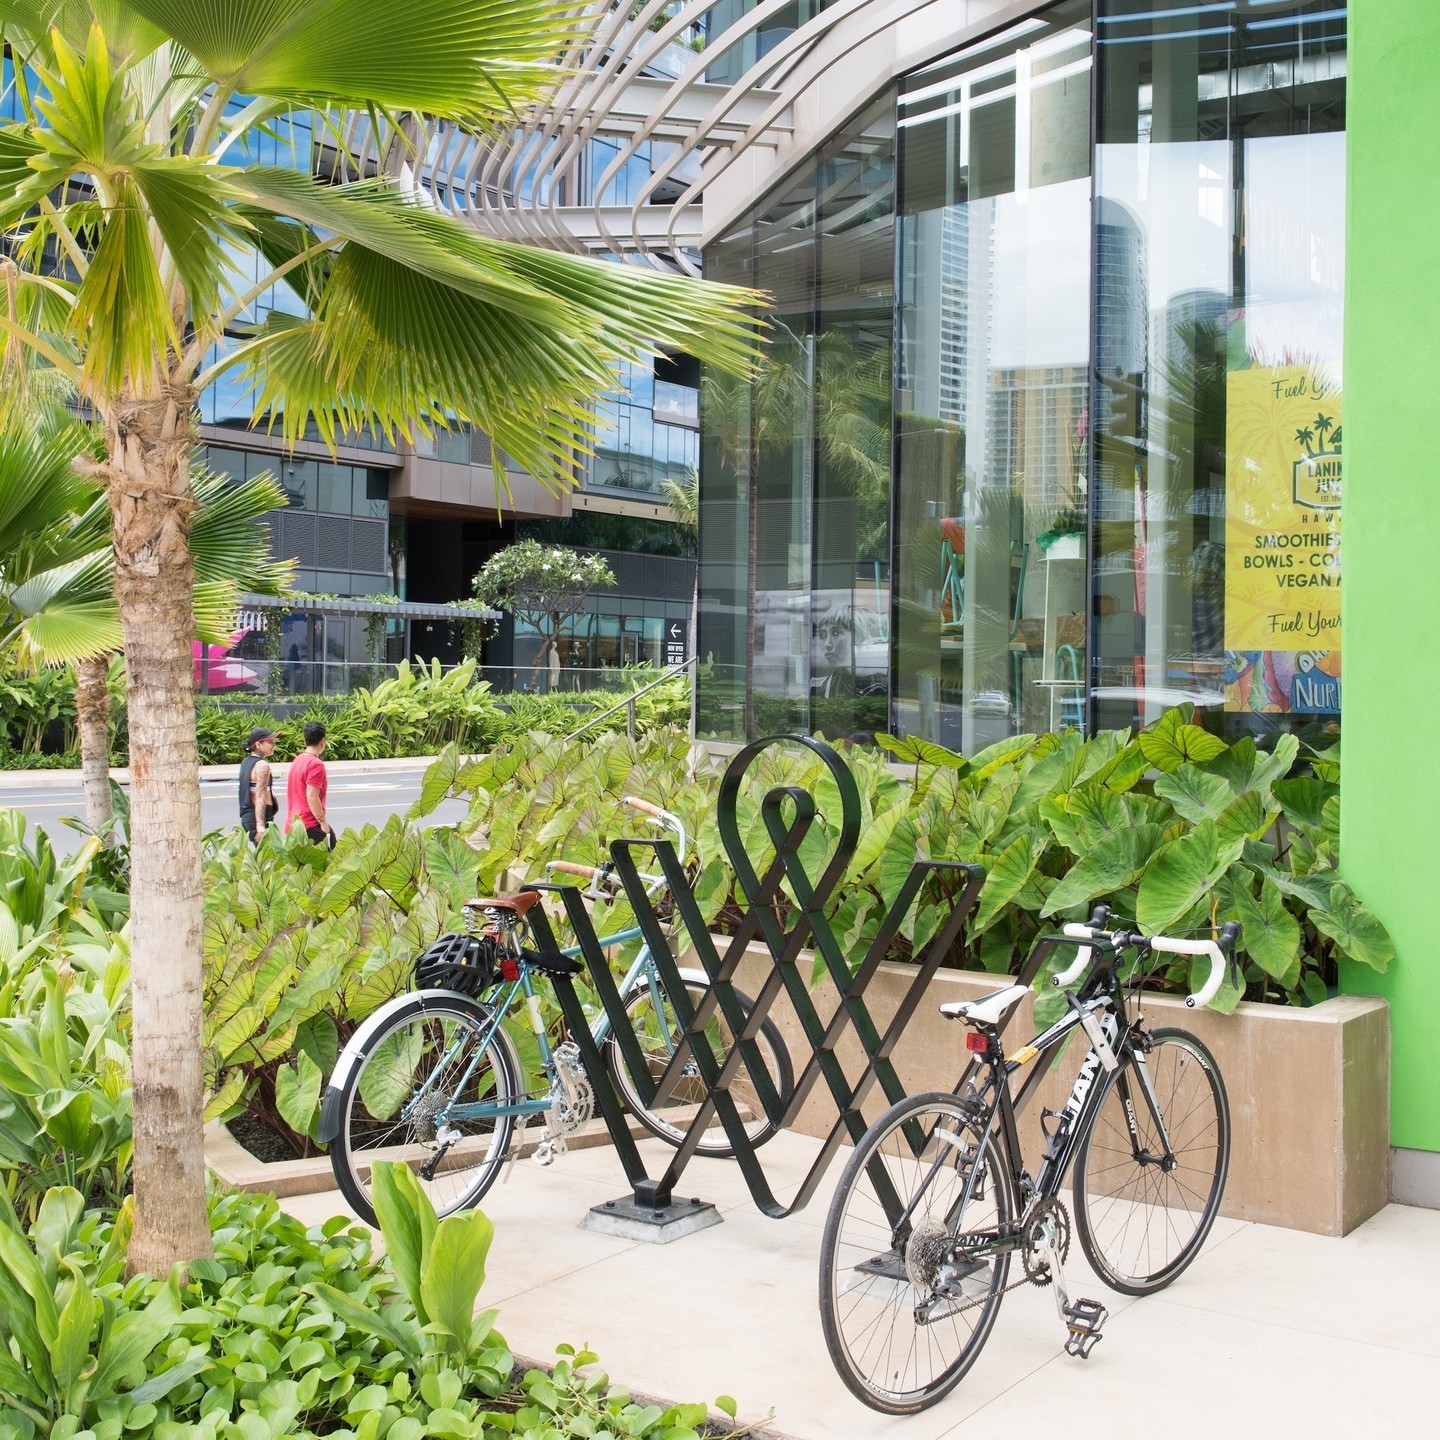 May is National Bike Month! Find dedicated bike racks throughout Ward Village to help you shop, dine, explore and cruise the neighborhood with ease.